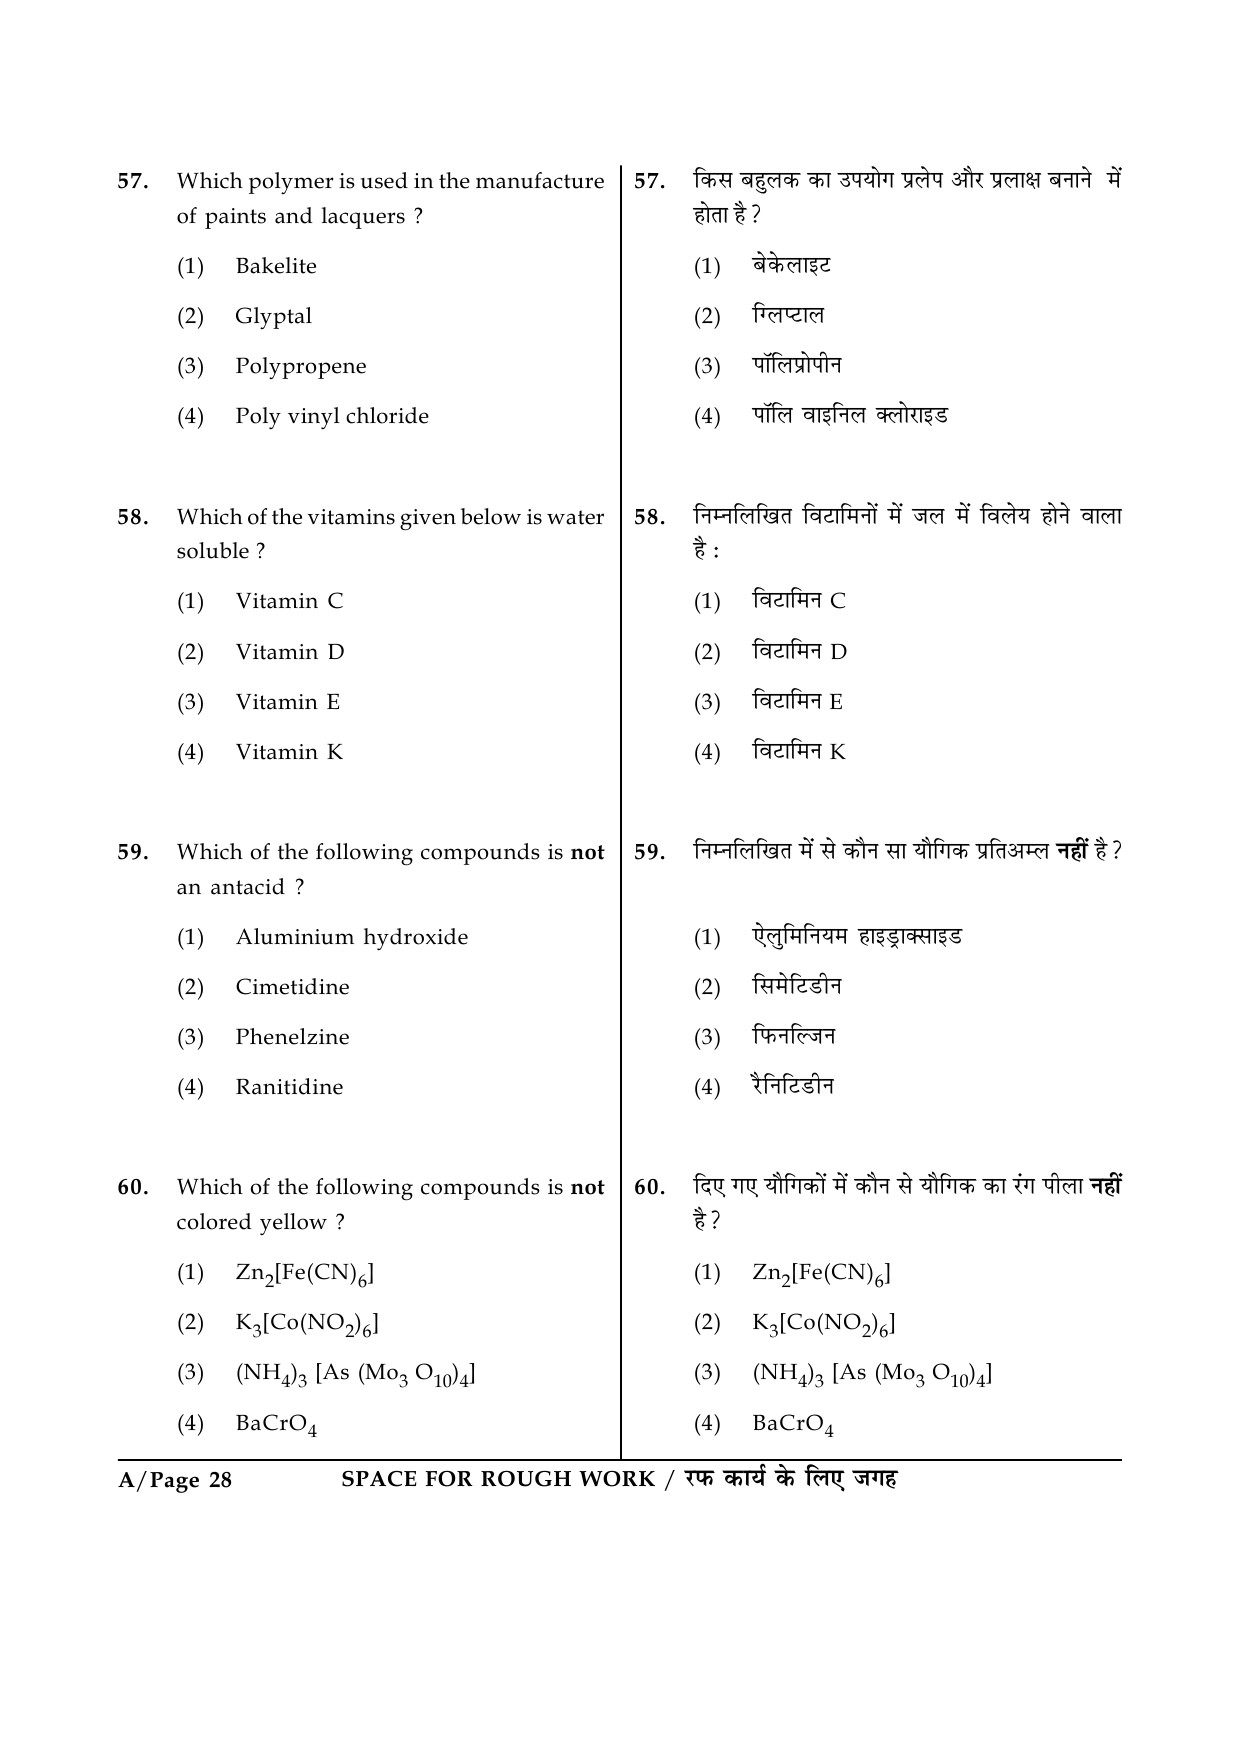 JEE Main Exam Question Paper 2015 Booklet A 28